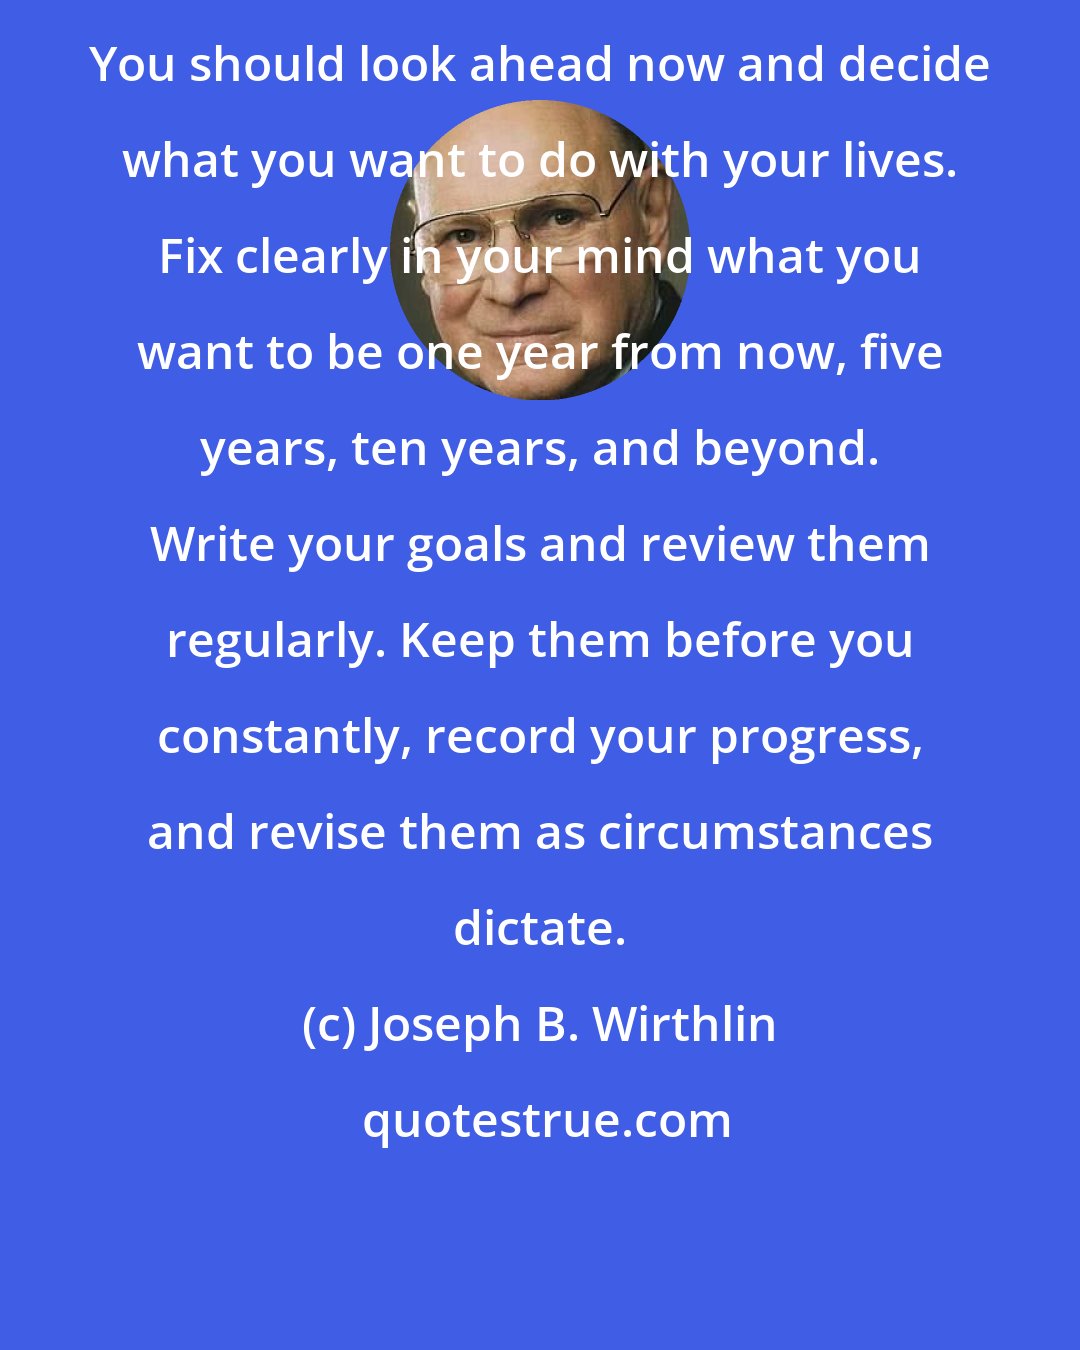 Joseph B. Wirthlin: You should look ahead now and decide what you want to do with your lives. Fix clearly in your mind what you want to be one year from now, five years, ten years, and beyond. Write your goals and review them regularly. Keep them before you constantly, record your progress, and revise them as circumstances dictate.